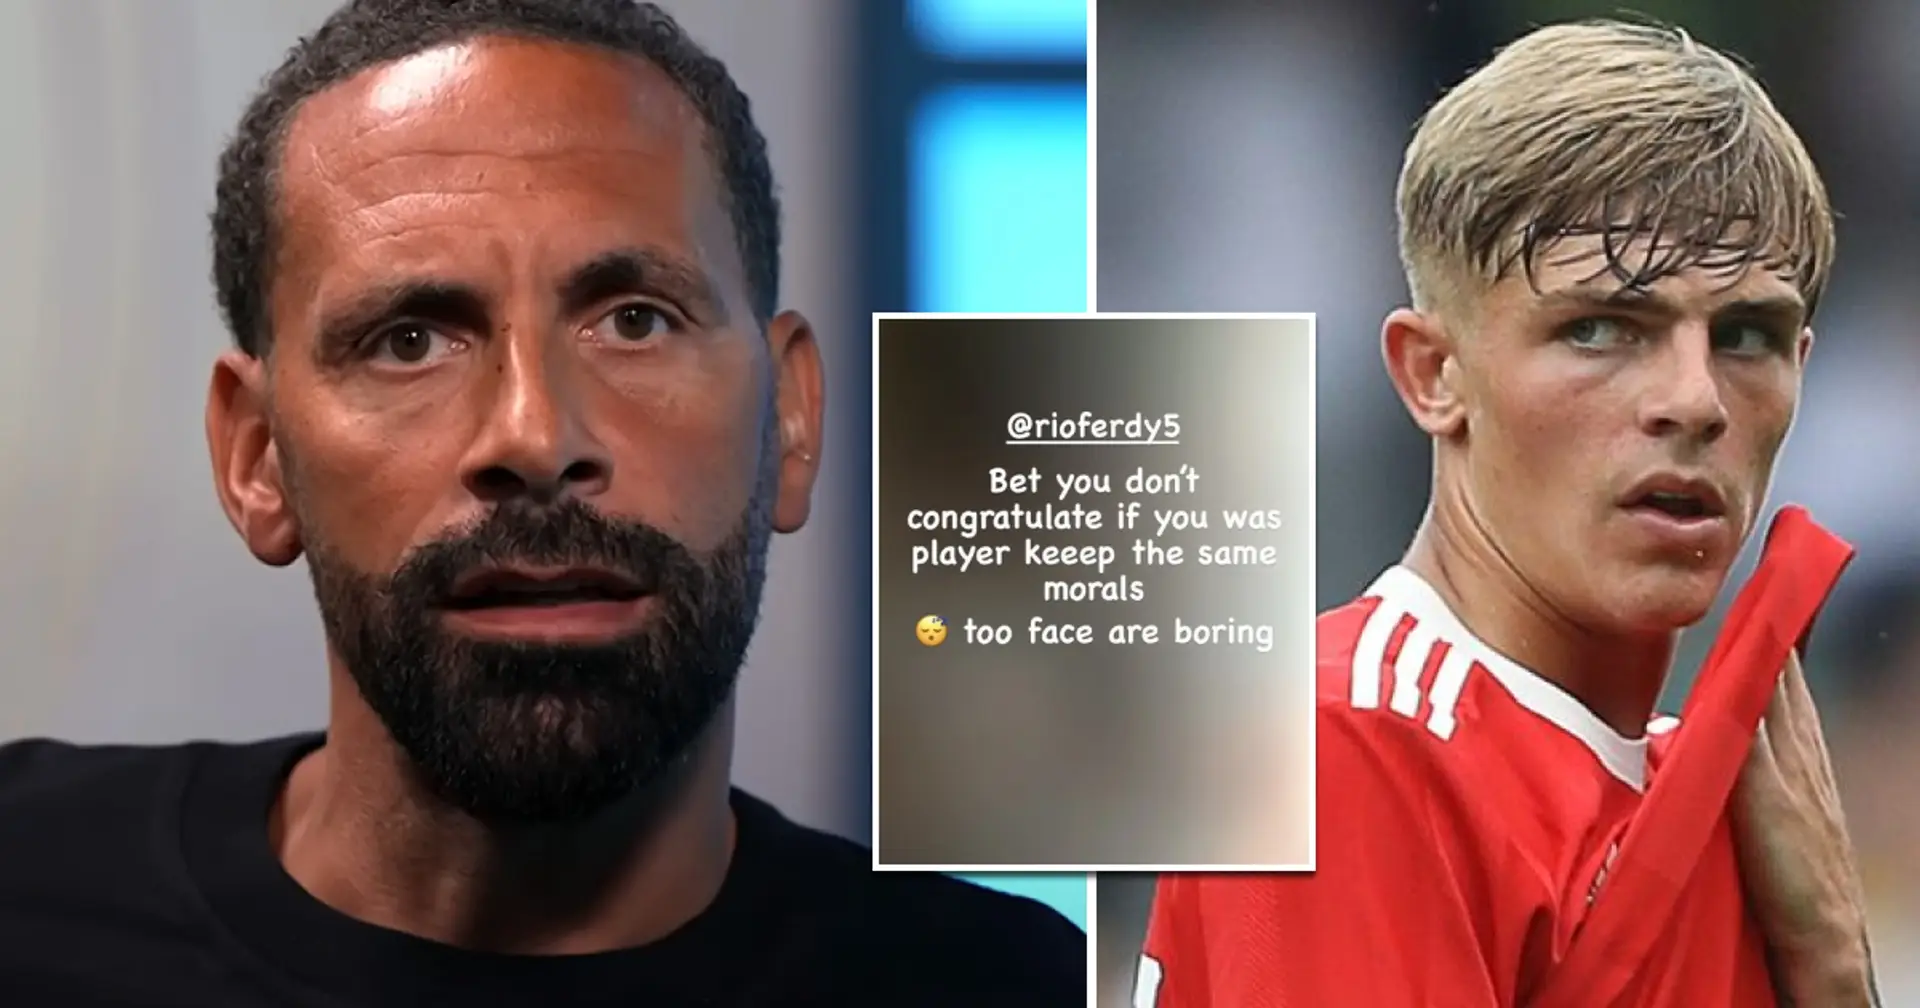 'Bet you don't congratulate if you was player': Brandon Williams SLAMS Rio Ferdinand for celebrating with Man City